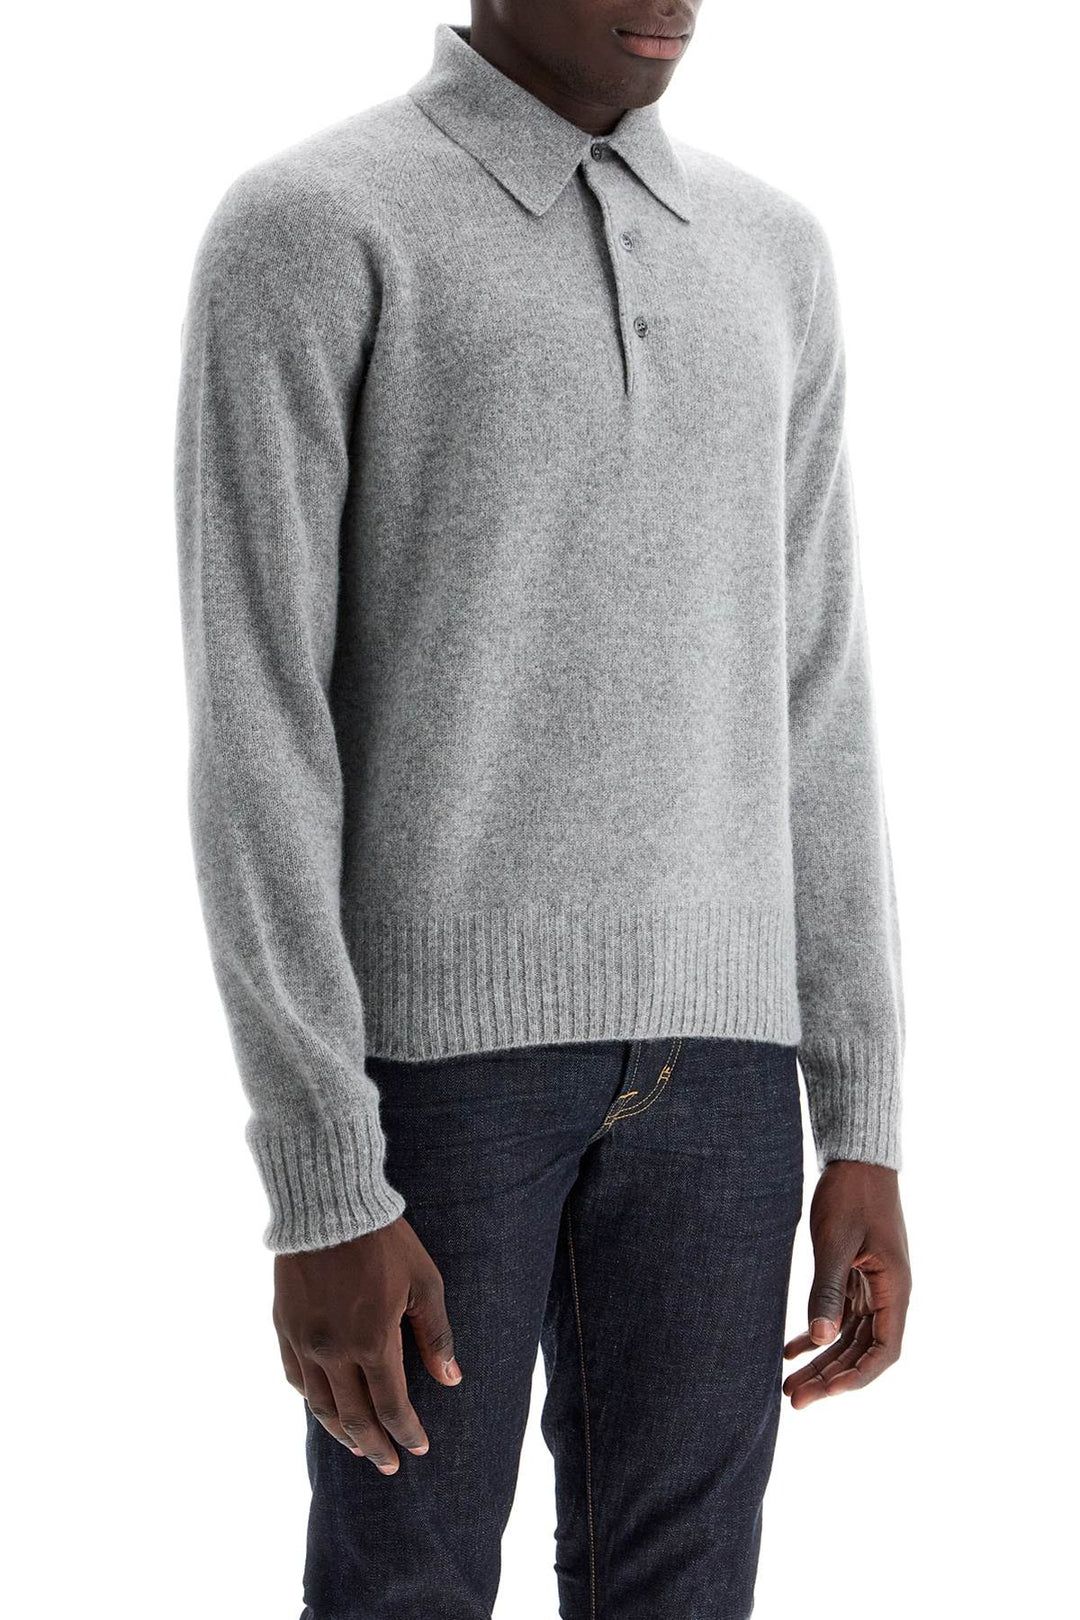 Tom Ford Cashmere Polo Style Pullover   Grey